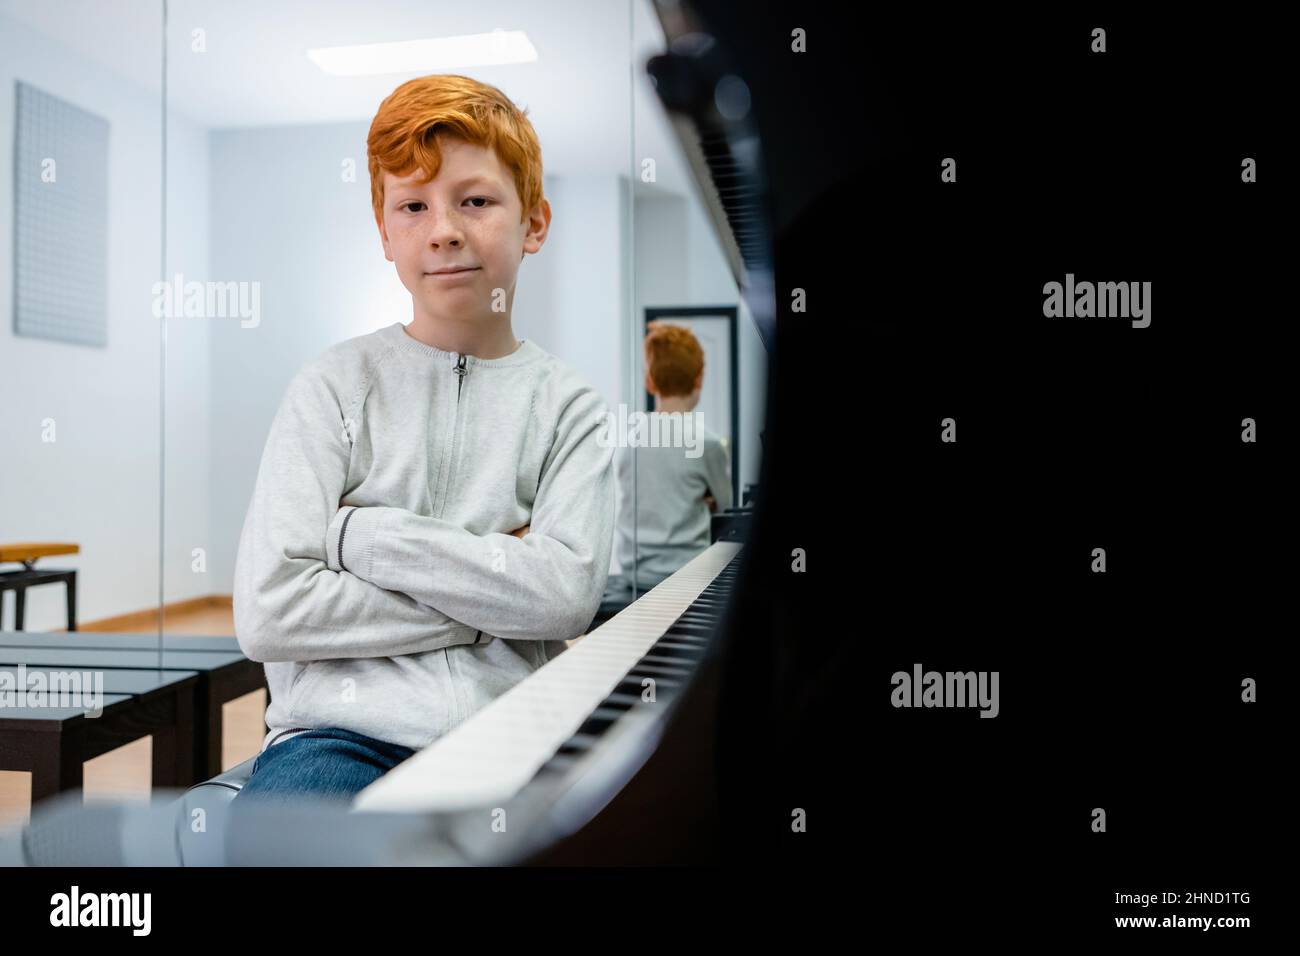 Content ginger preteen child sitting near piano in classroom and looking at camera Stock Photo